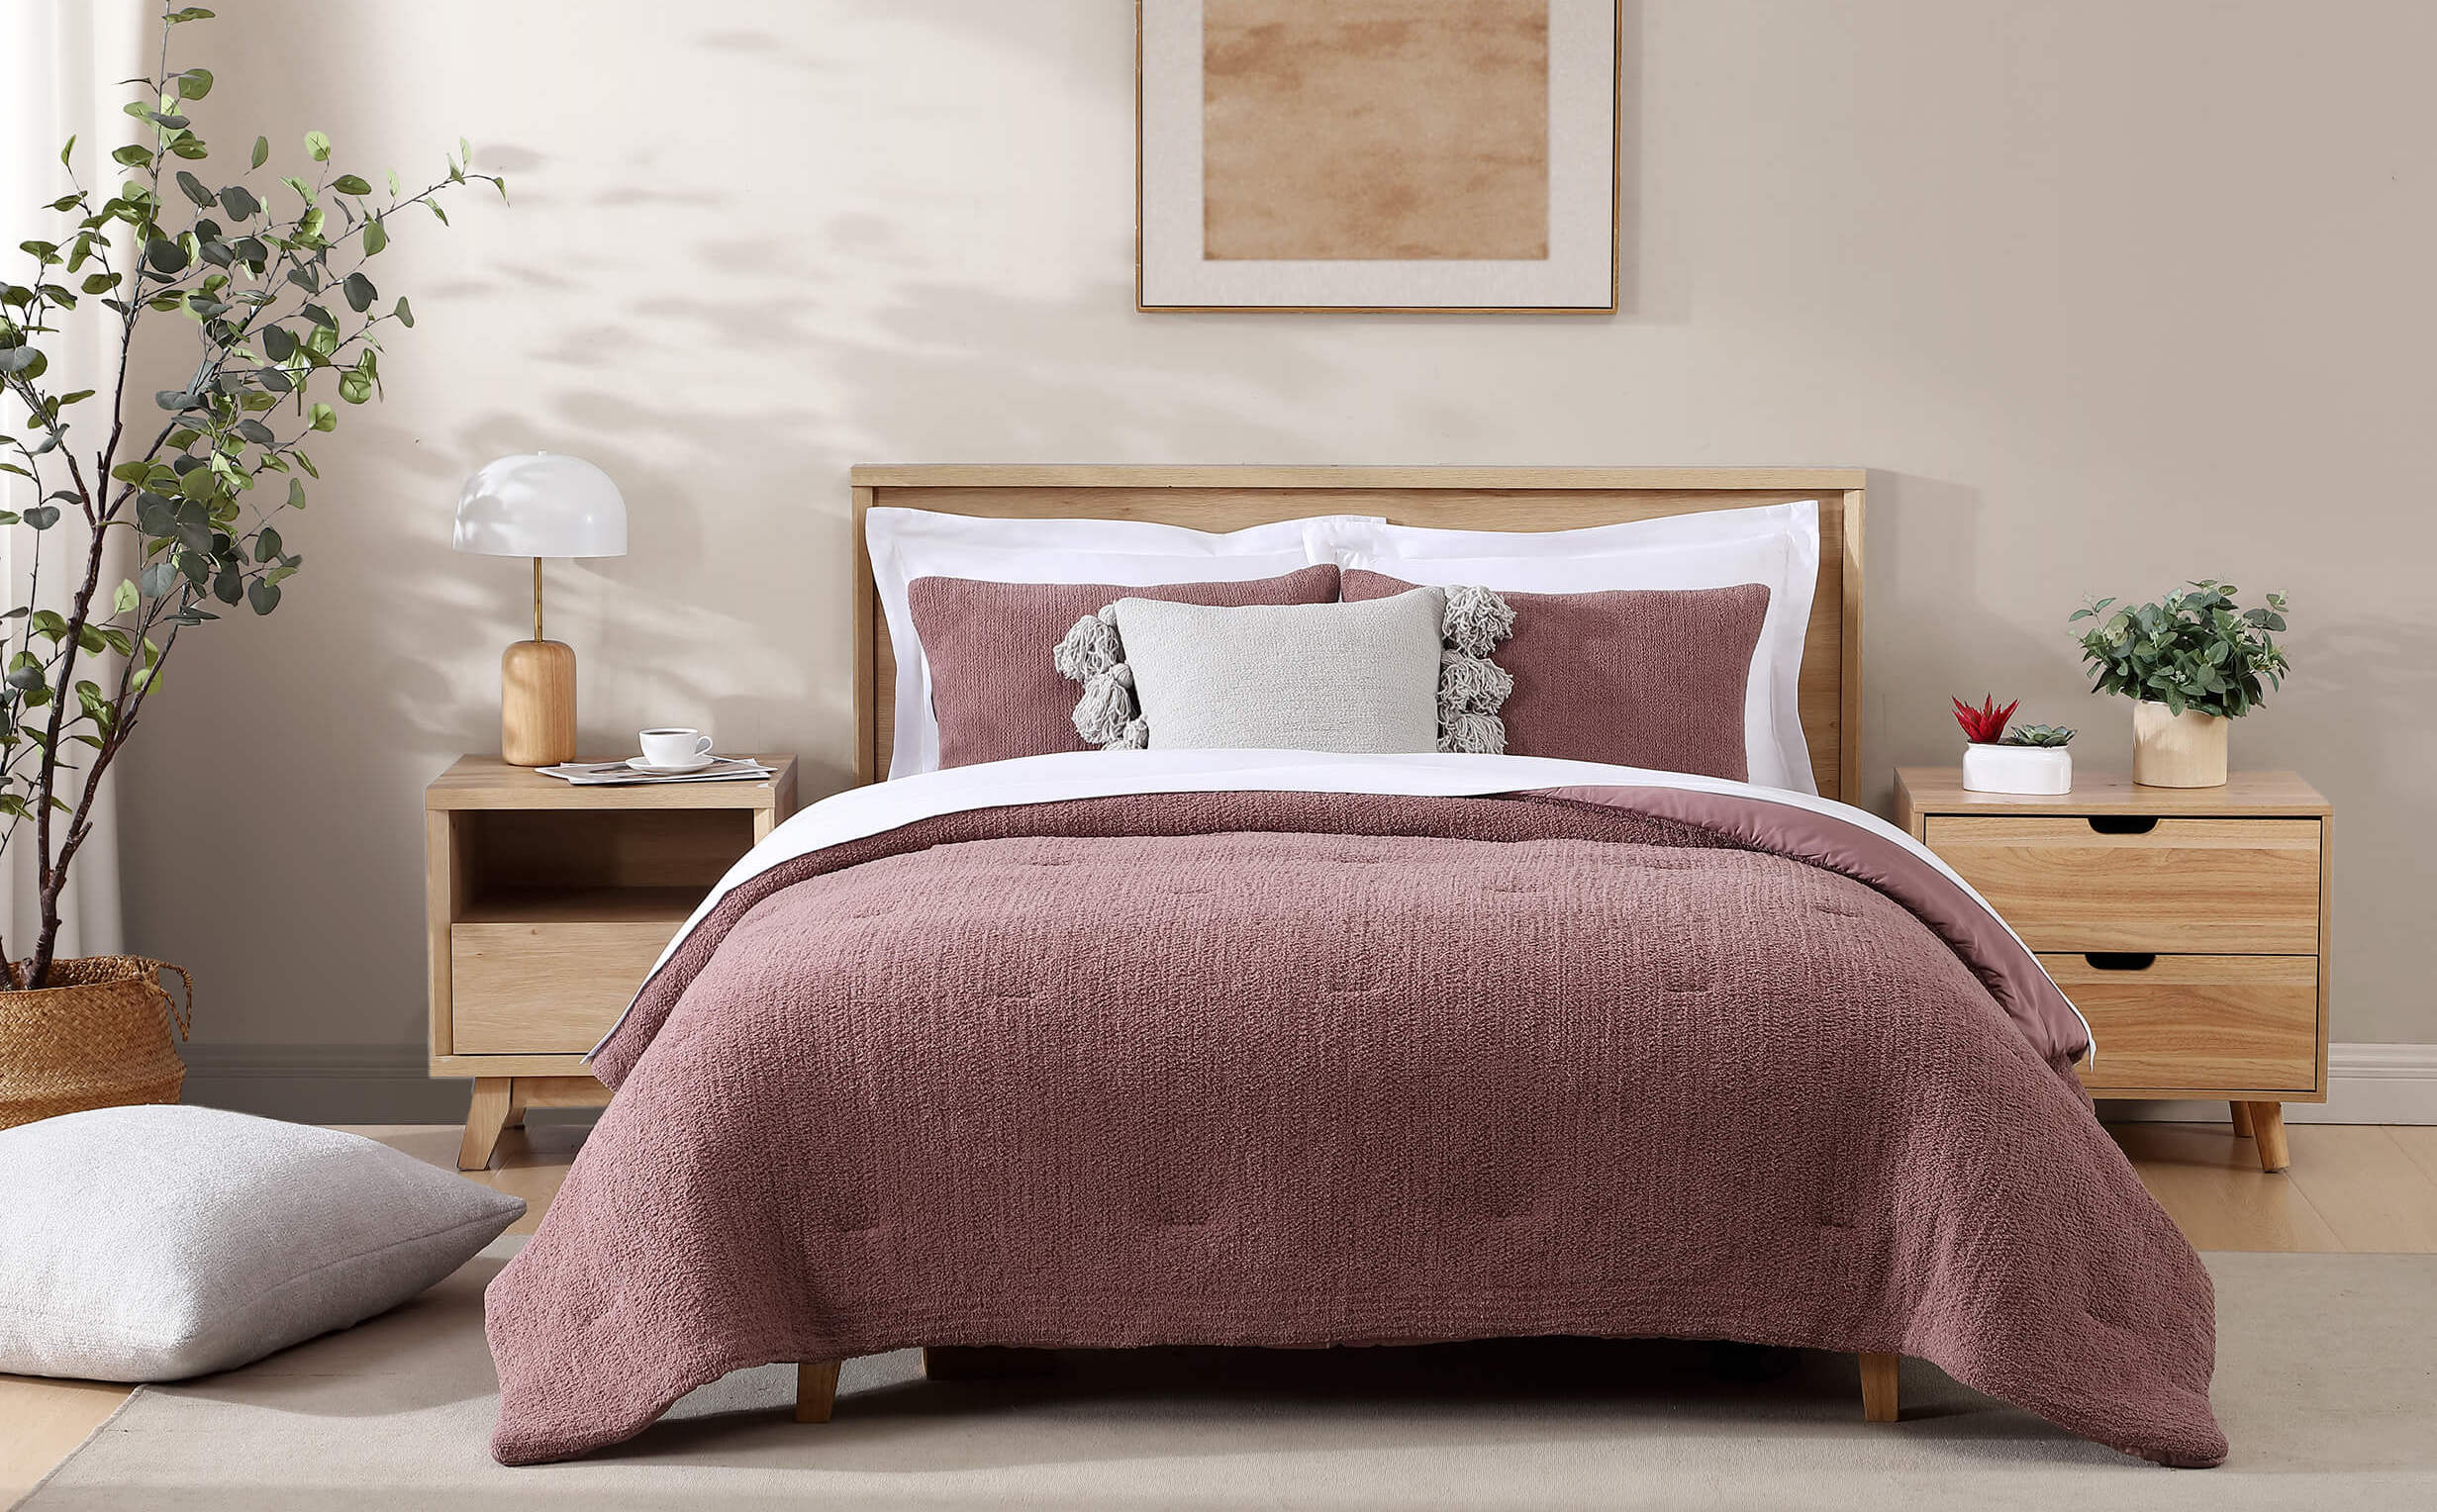 5 Must-Have Qualities in Your Next Duvet Cover for Ultimate Comfort